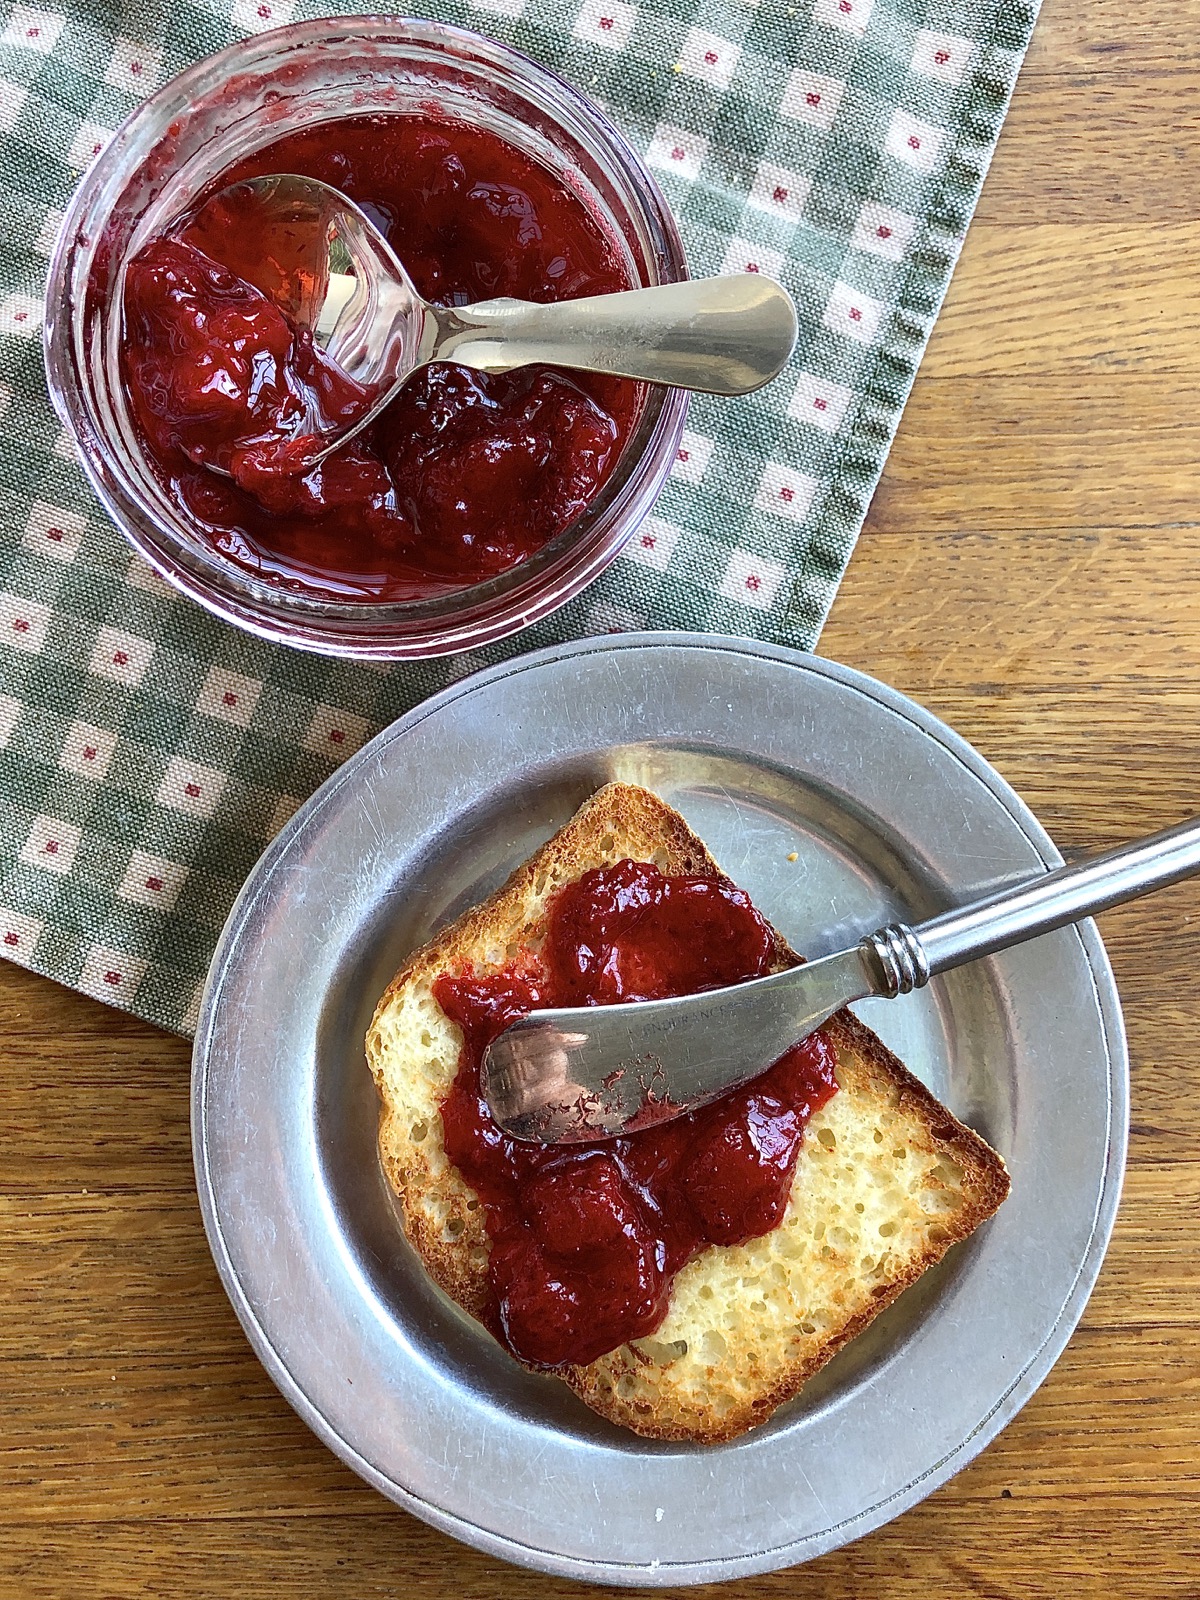 Slice of buttered toast with strawberry jam, jar of jam with spoon.